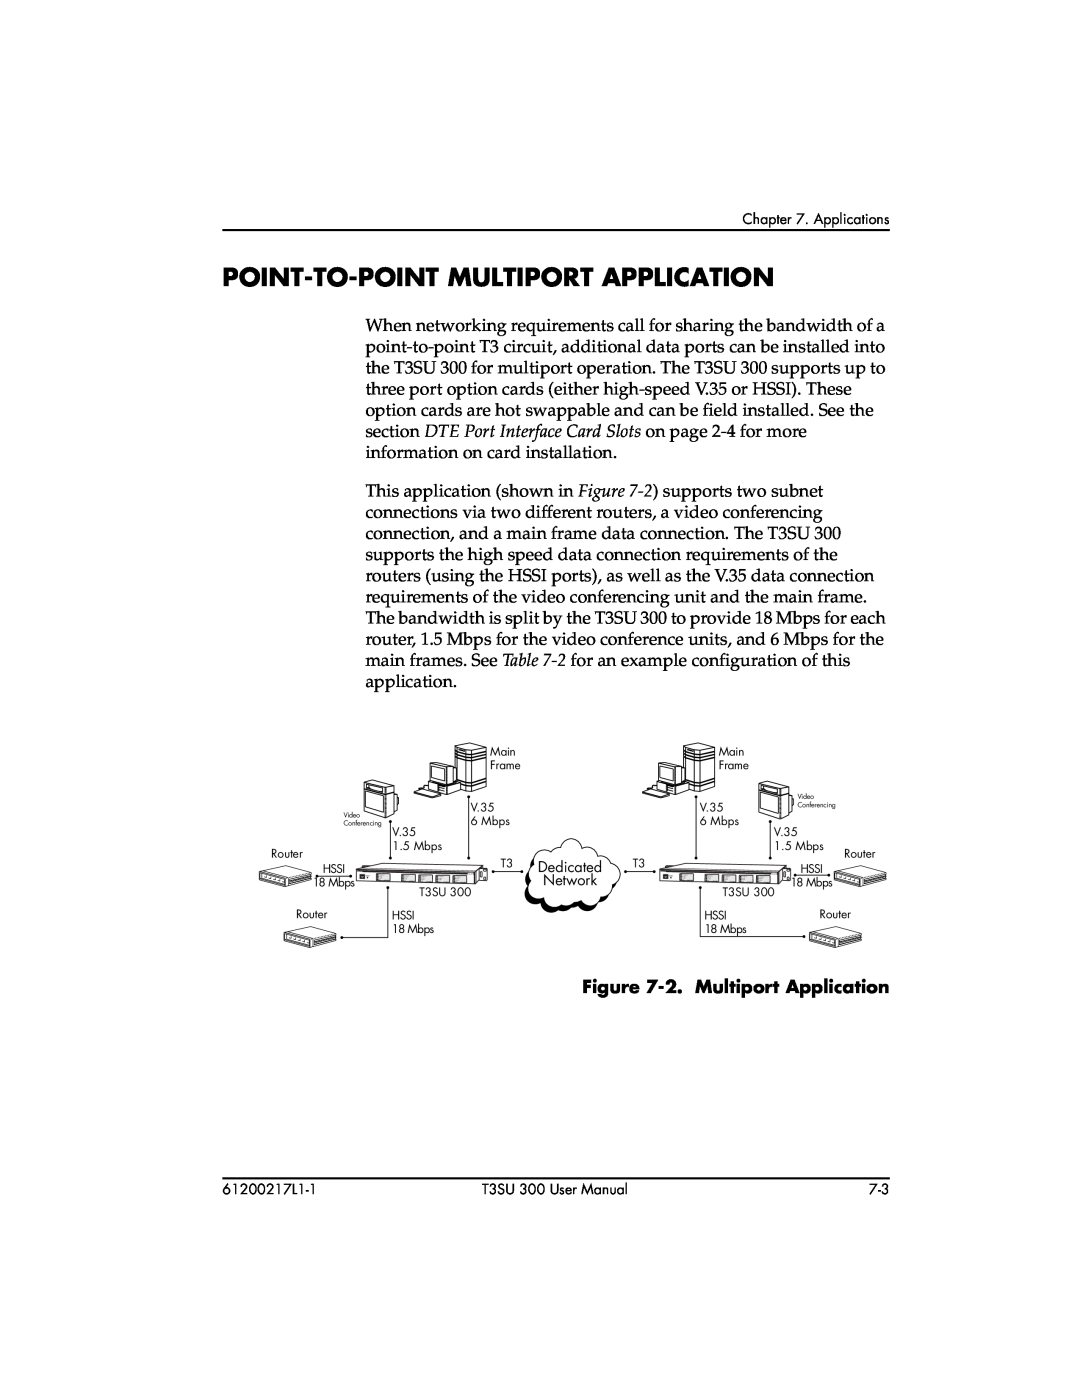 ADTRAN T3SU 300 user manual Point-To-Point Multiport Application, 2. Multiport Application 